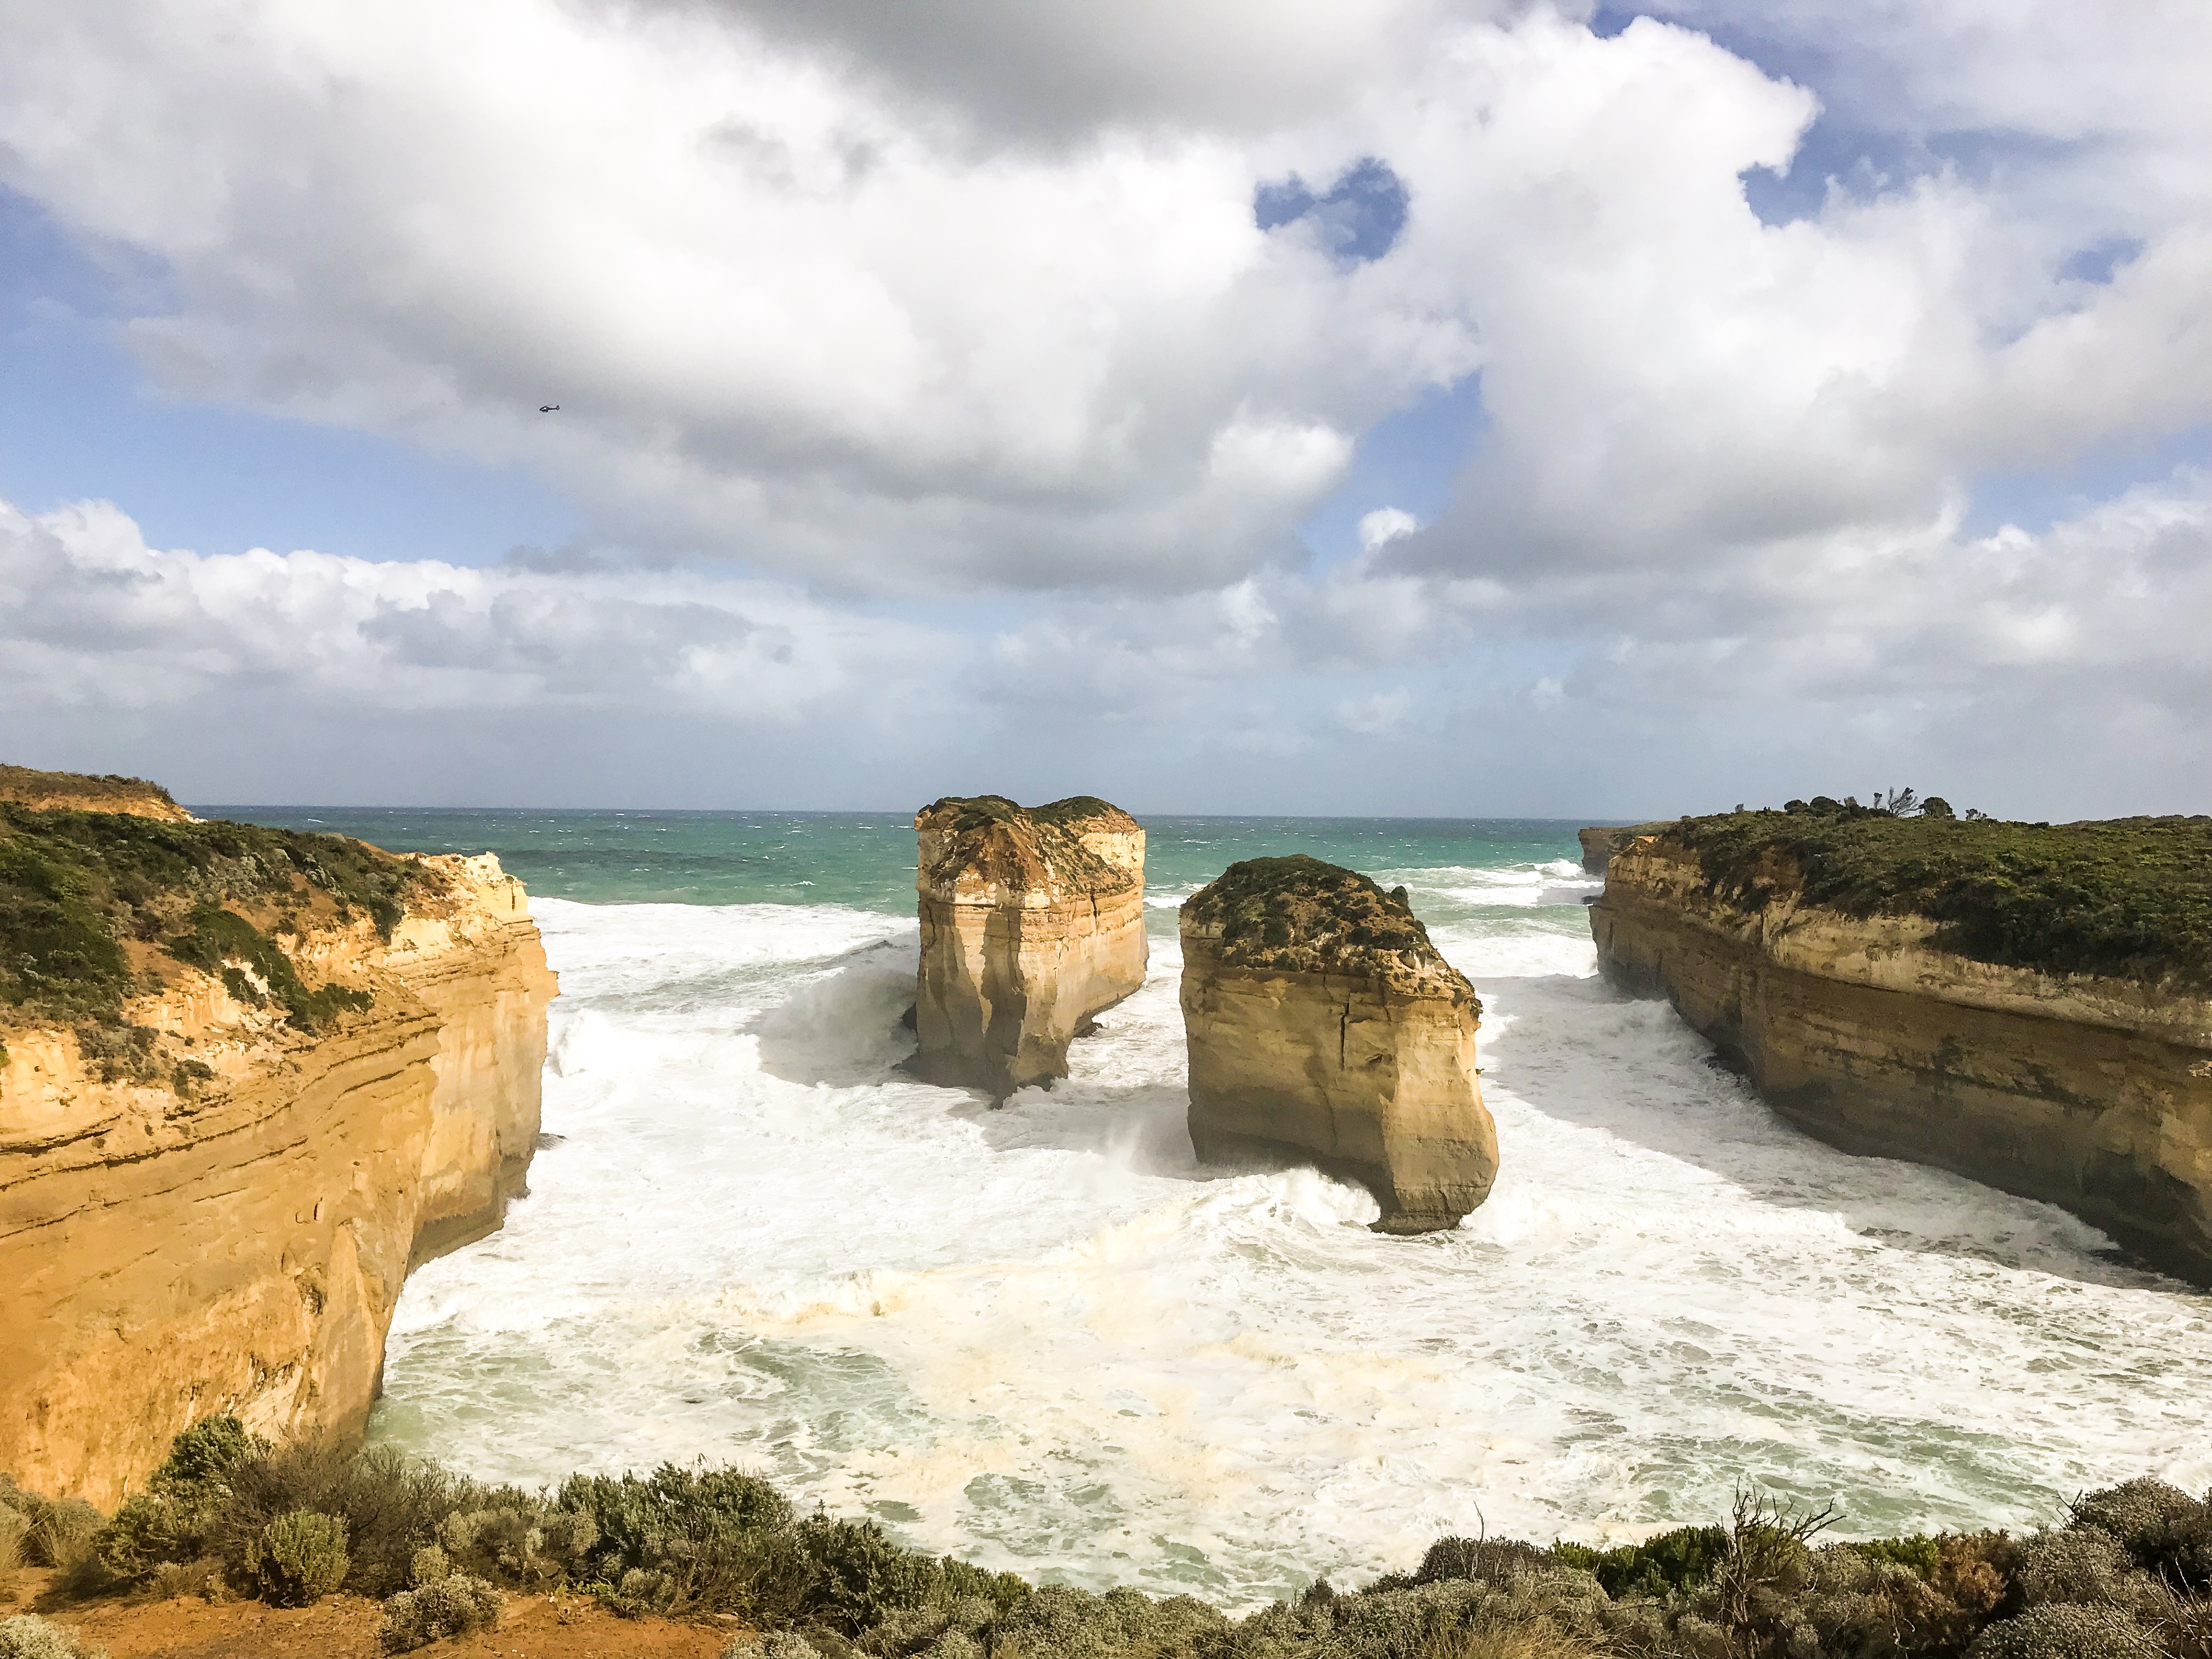 A Day Trip to the Great Ocean Road from Melbourne